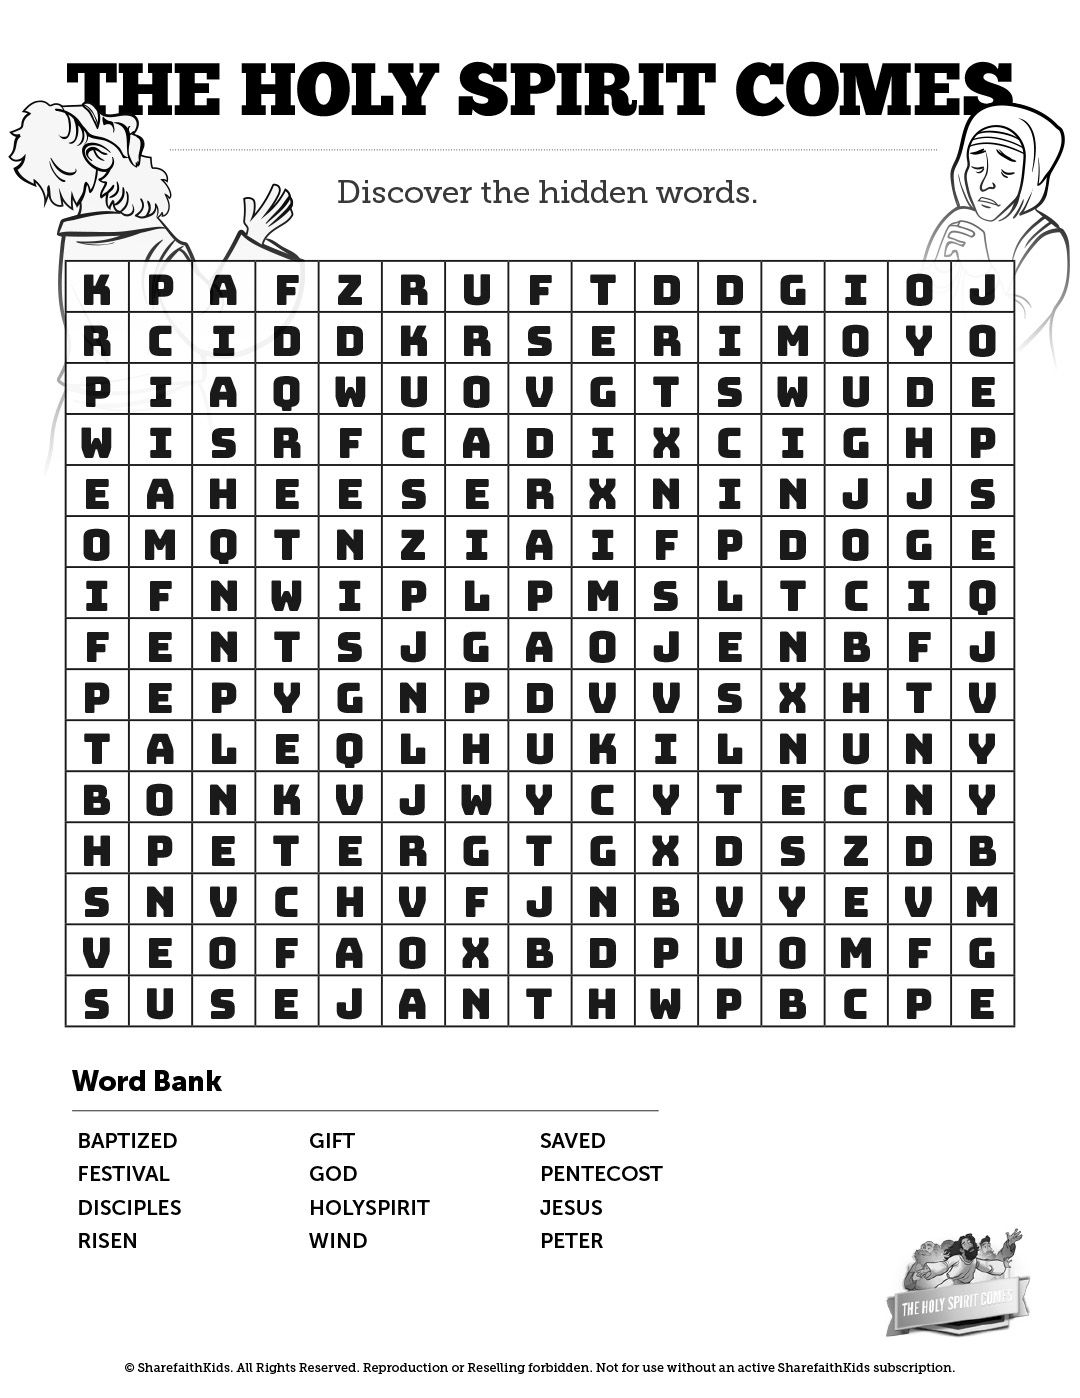 Acts 2 The Holy Spirit Comes Bible Word Search Puzzles: If